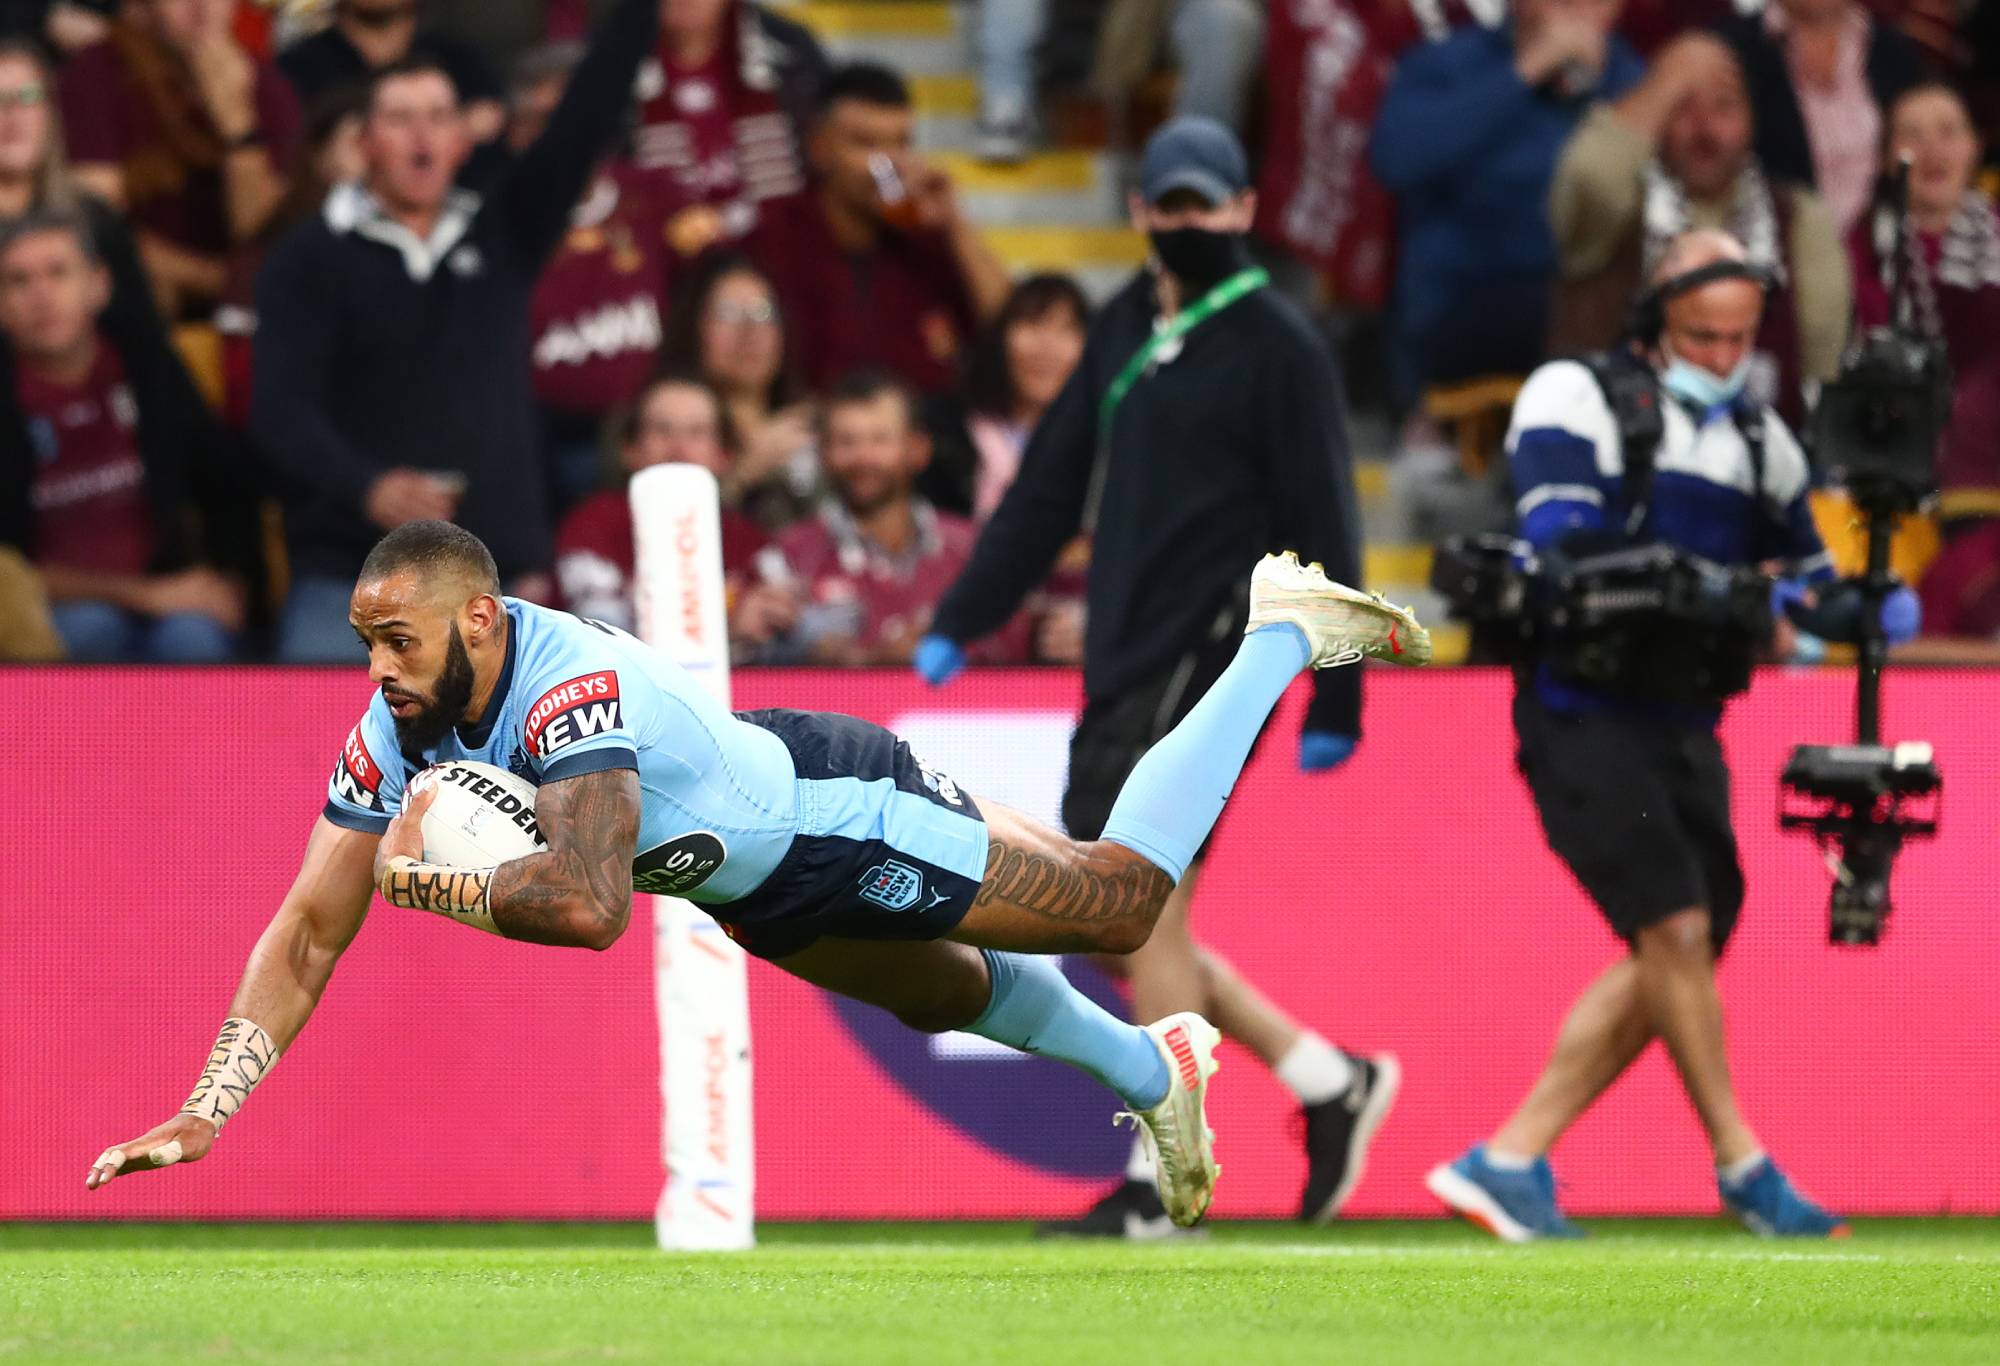 Josh Addo-Carr scores a try in Queensland